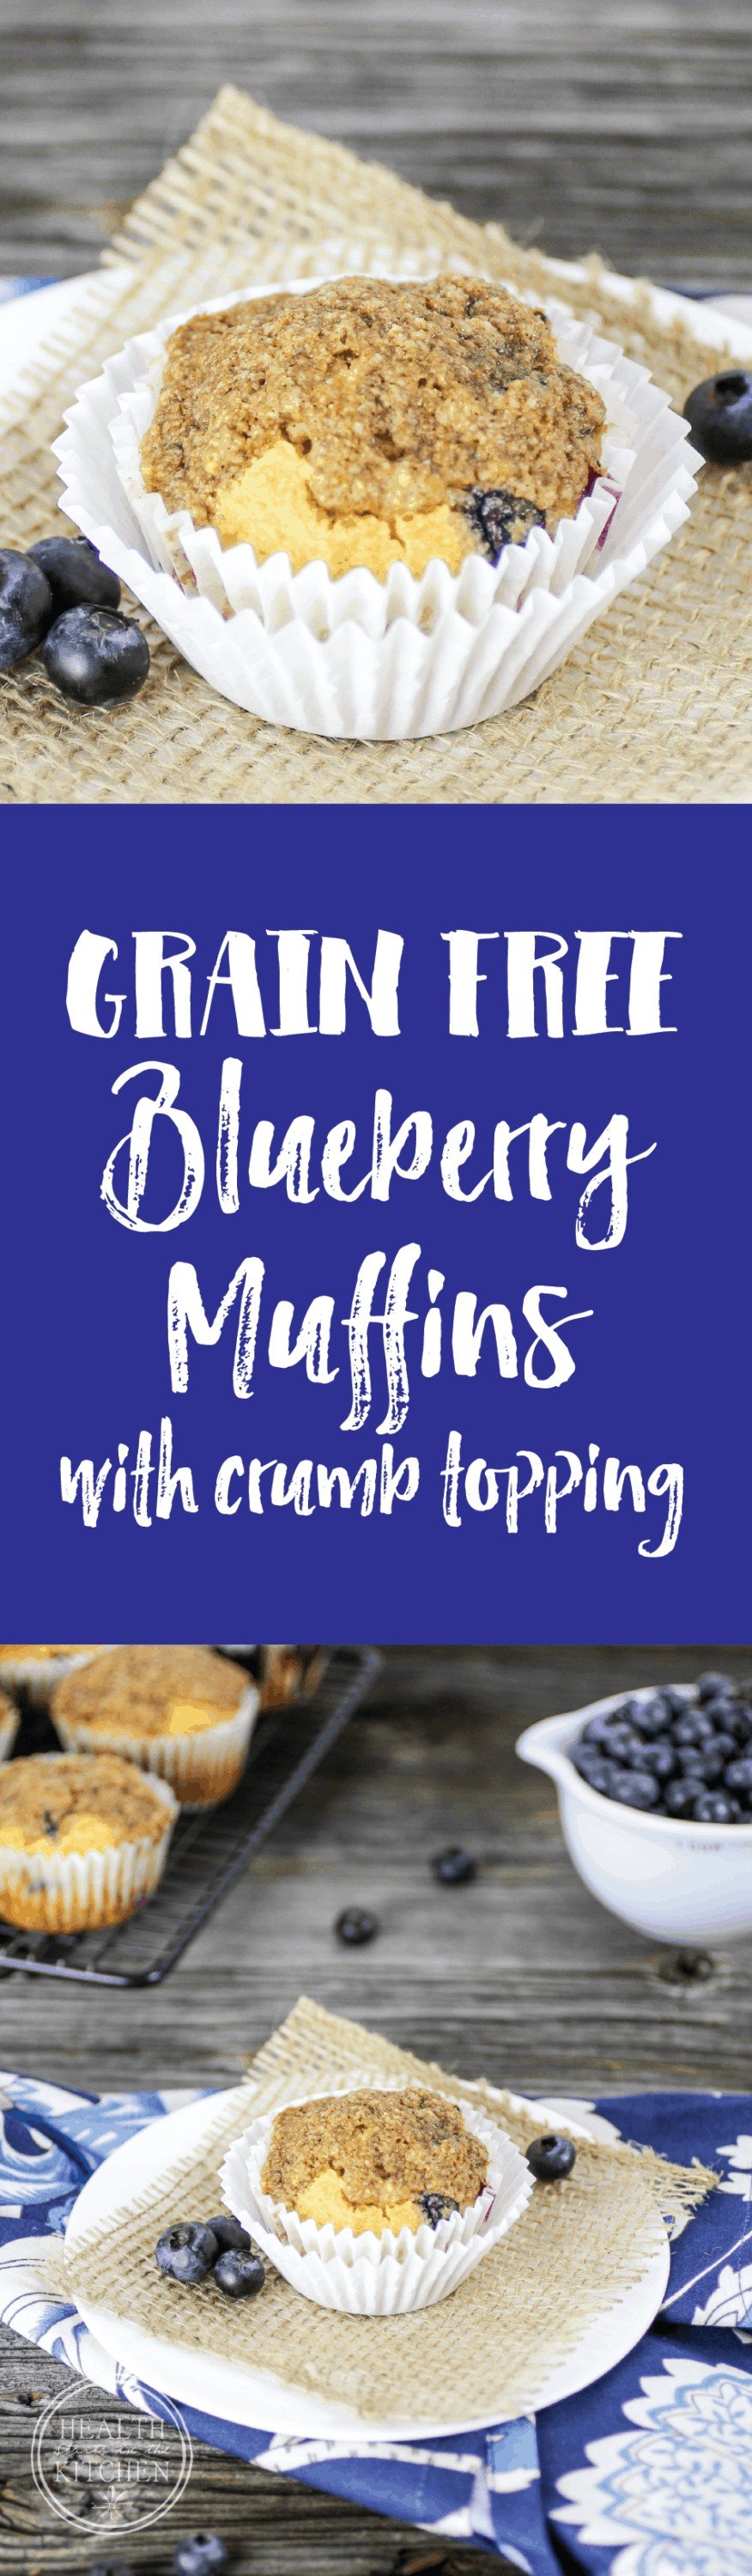 Grain Free Blueberry Muffins with Crumb Topping 